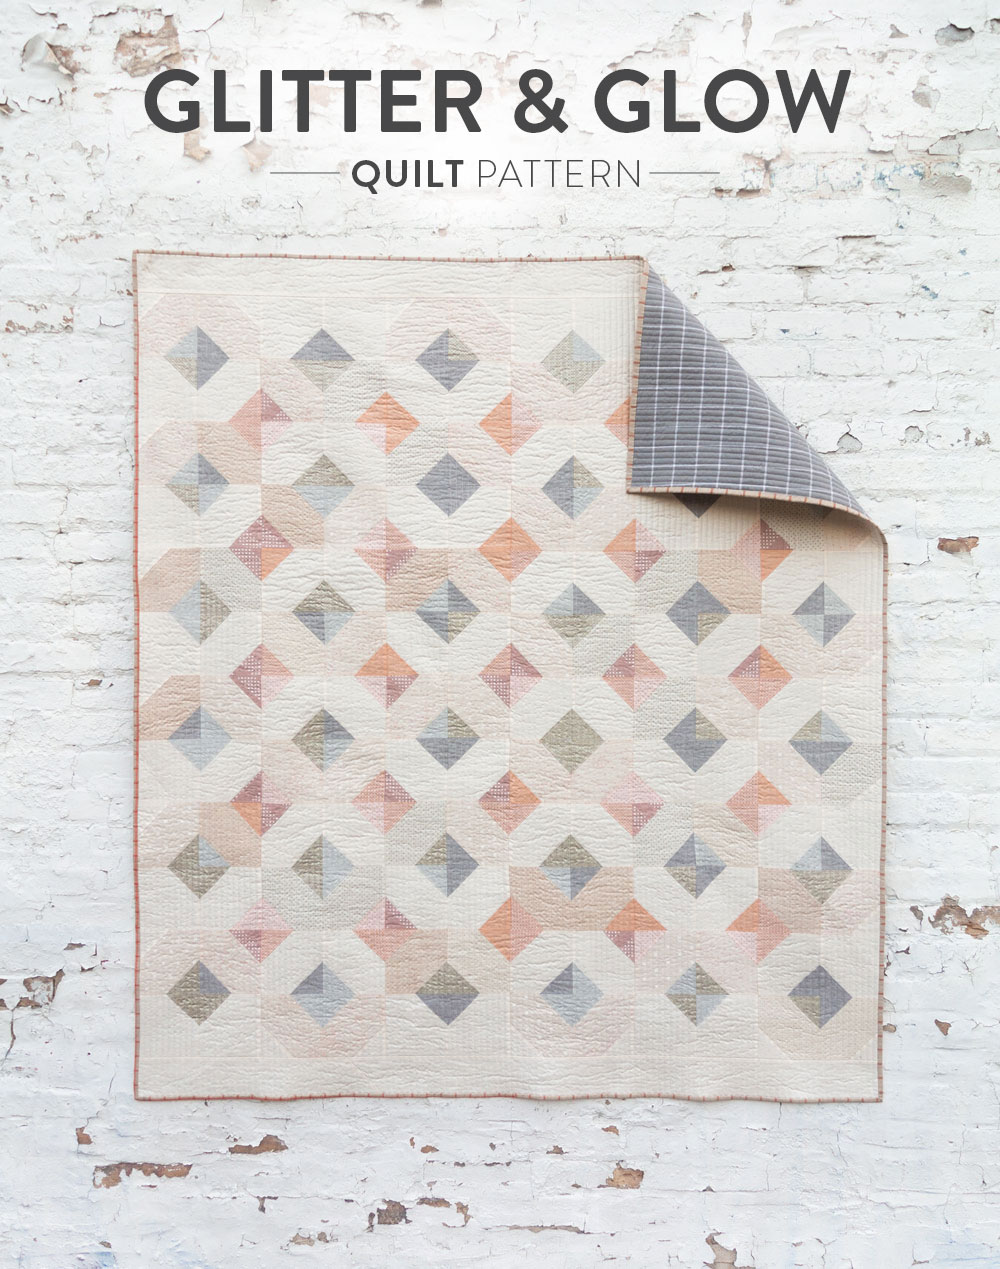 The Glitter & Glow quilt pattern comes in king, queen/full, twin, throw and baby quilt sizes. It's a simple beginner-friendly quilt pattern that is also scrap and fat quarter friendly!